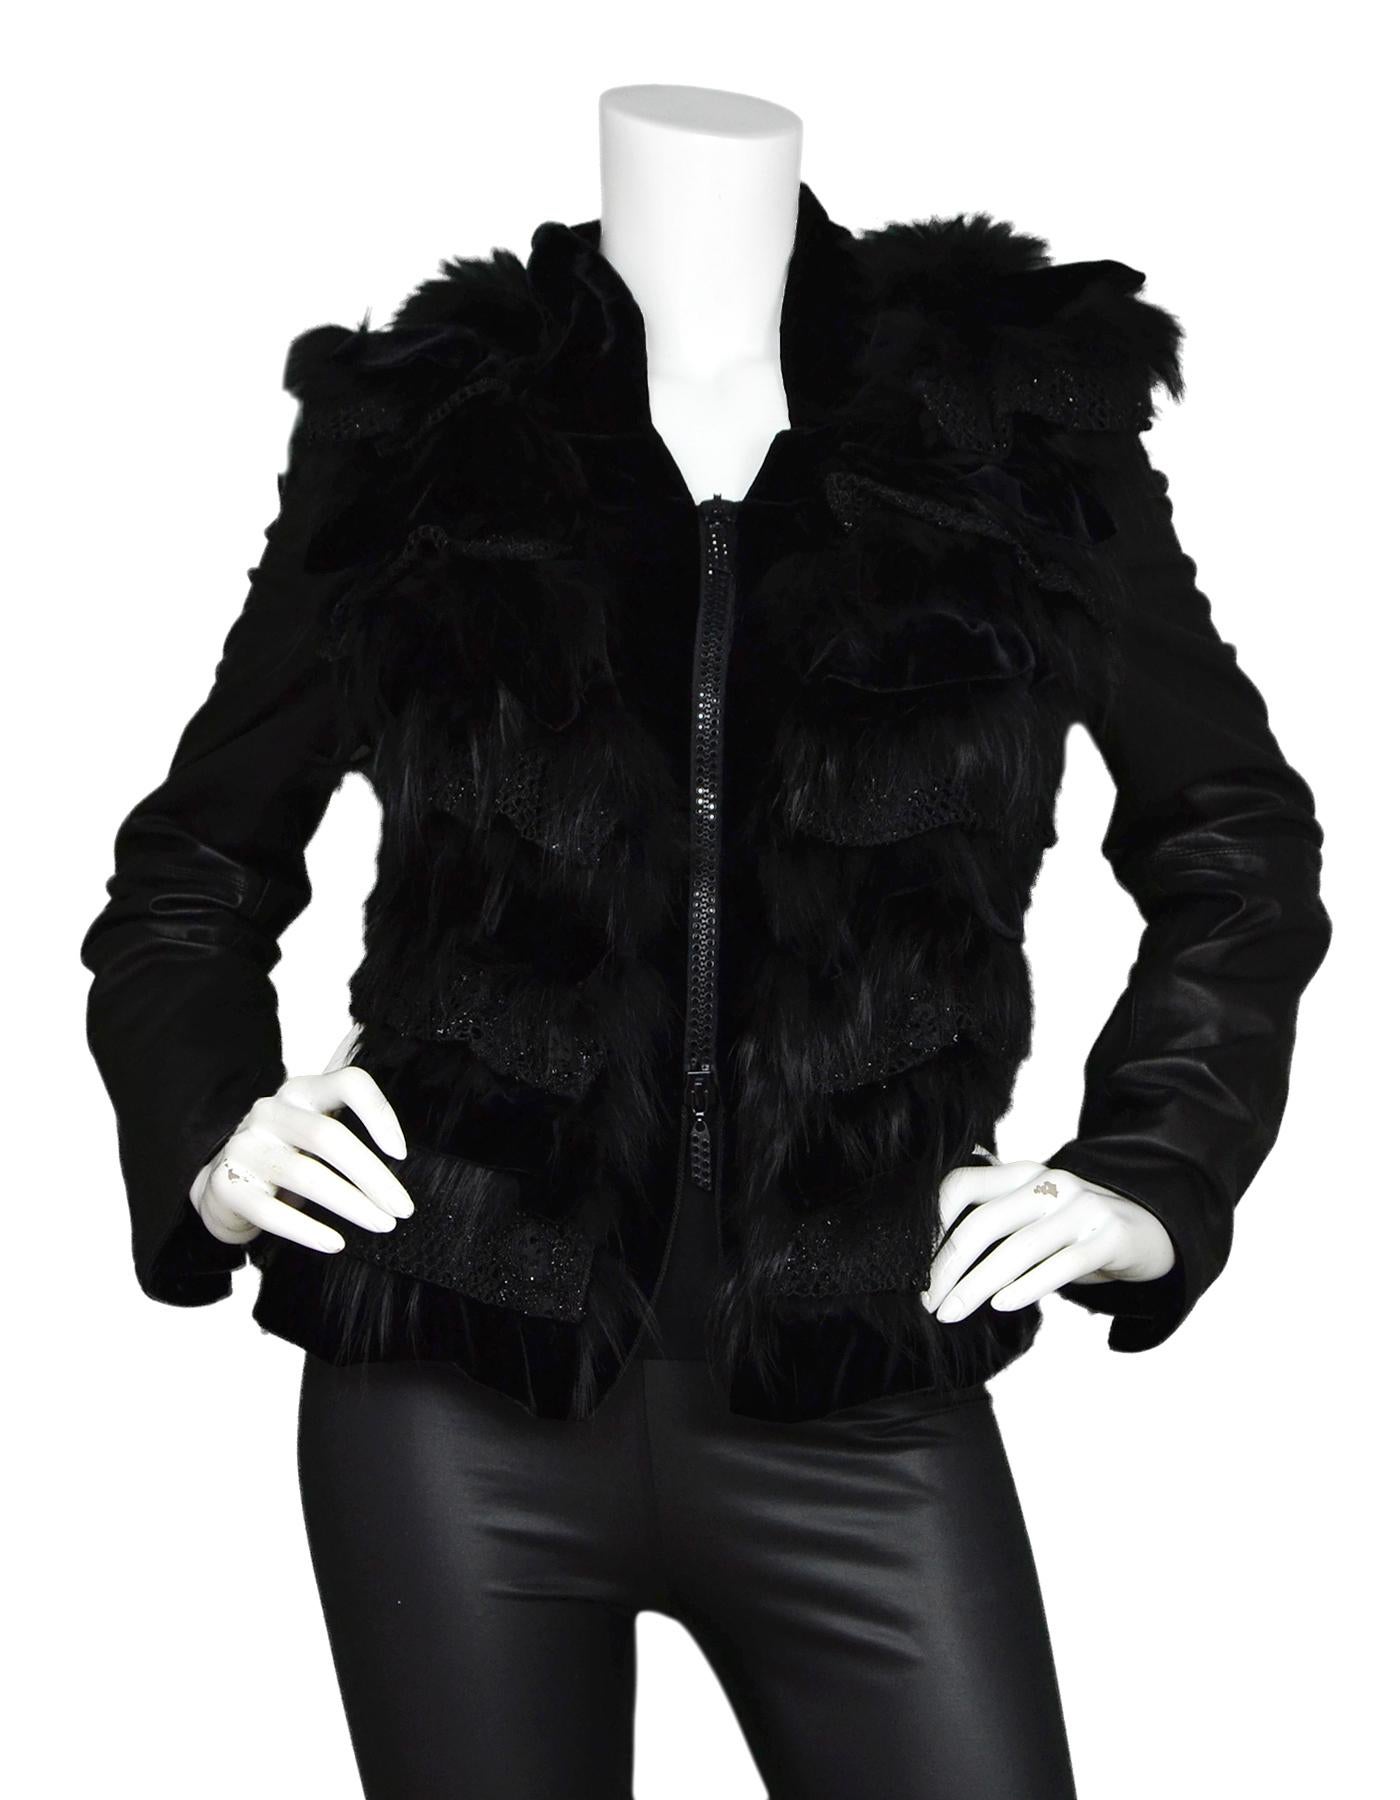 Giorgio Armani Leather Jacket W/ Crystal Zip, Velvet & Fur Trim Sz 40

Made In:  Italy
Color: Black
Materials: 75% viscose, 25% silk, fox hair, lambskin
Lining: 100% silk
Opening/Closure: Zip front
Overall Condition: Excellent pre-owned condition
